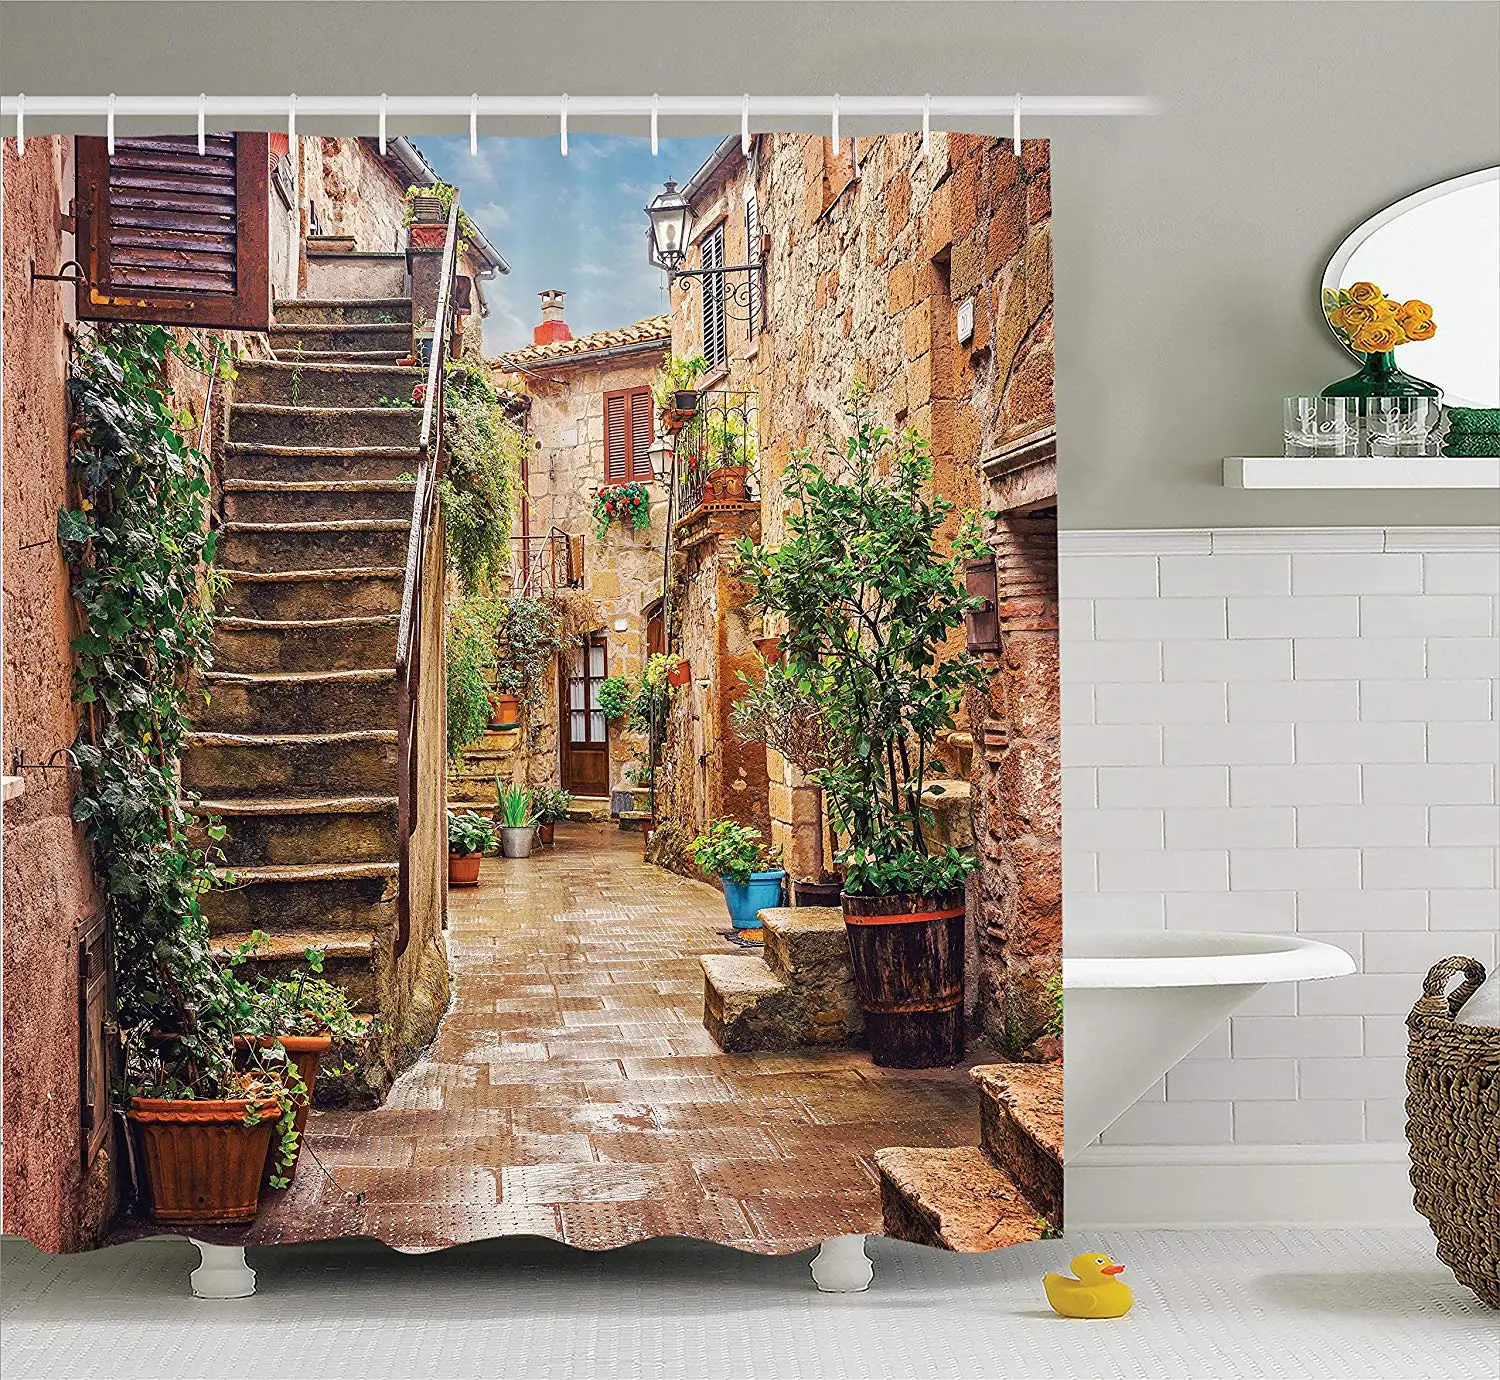 Map of Italy Vintage History Mediterranean Home Decor Image Shower Curtain Set 